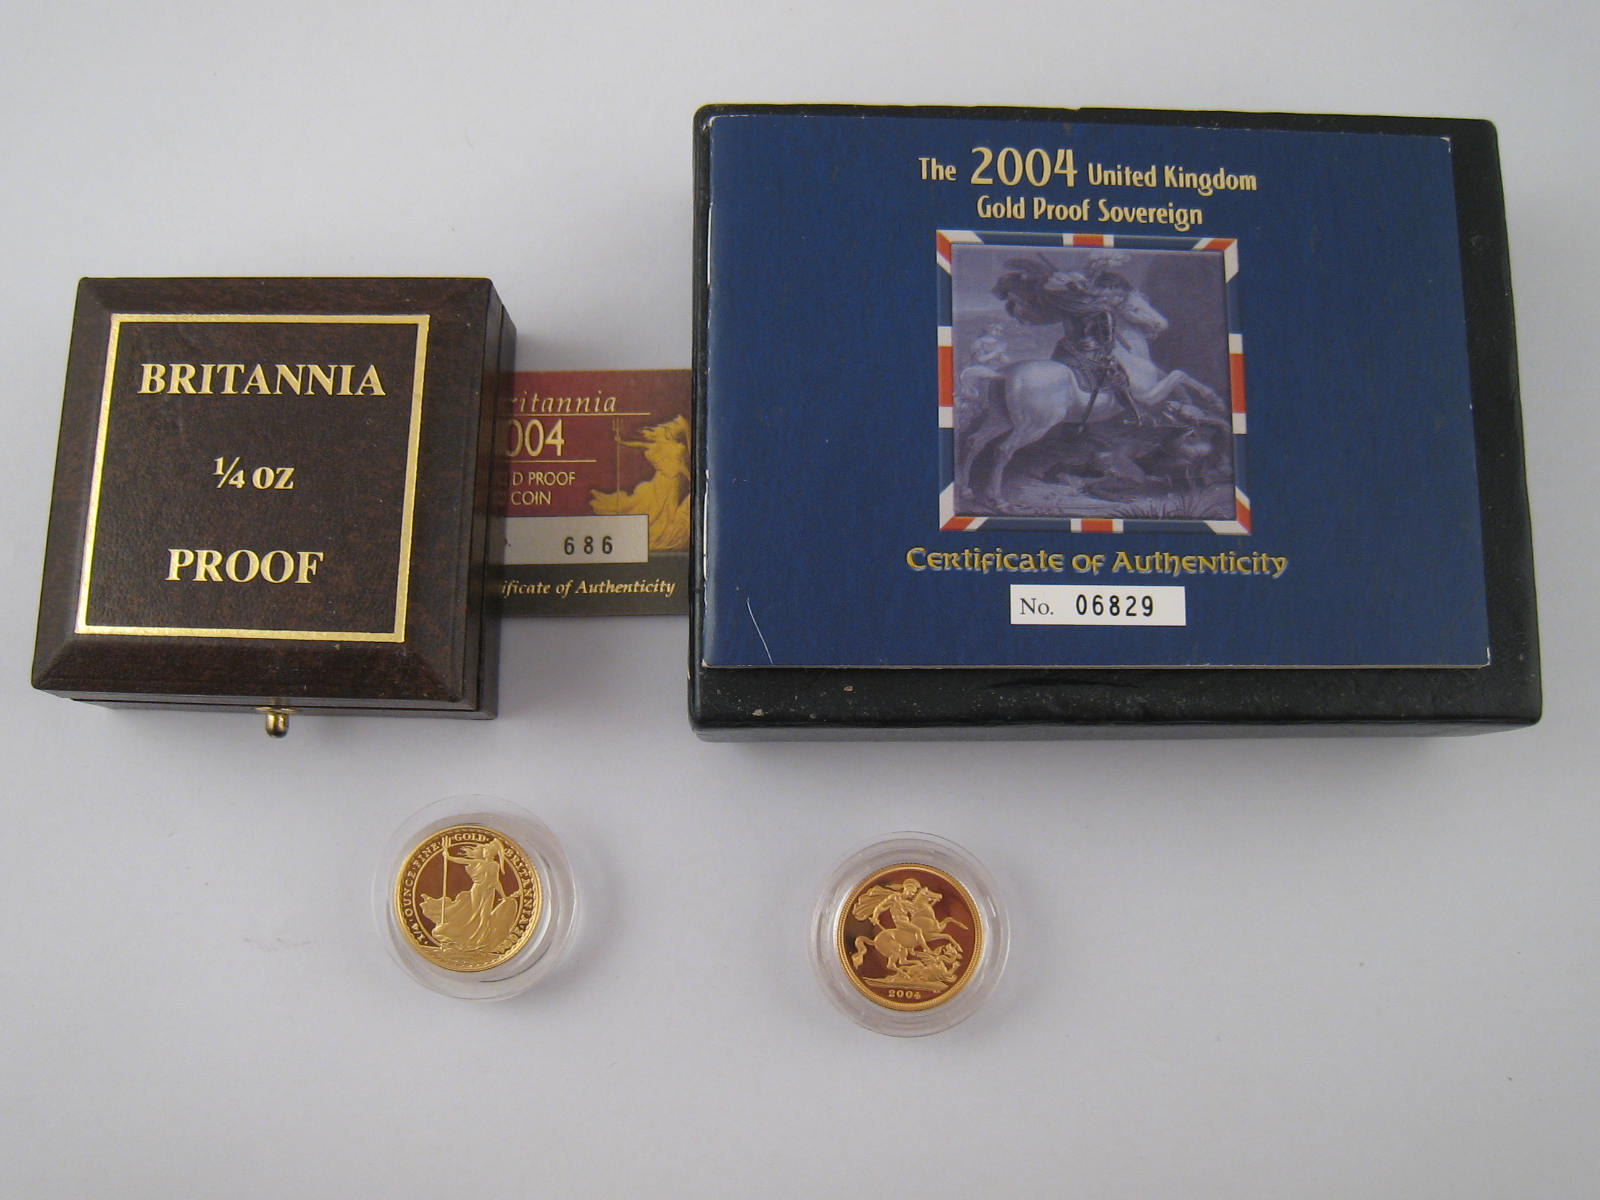 A 2004 gold proof Sovereign and a 1/4 oz gold proof.